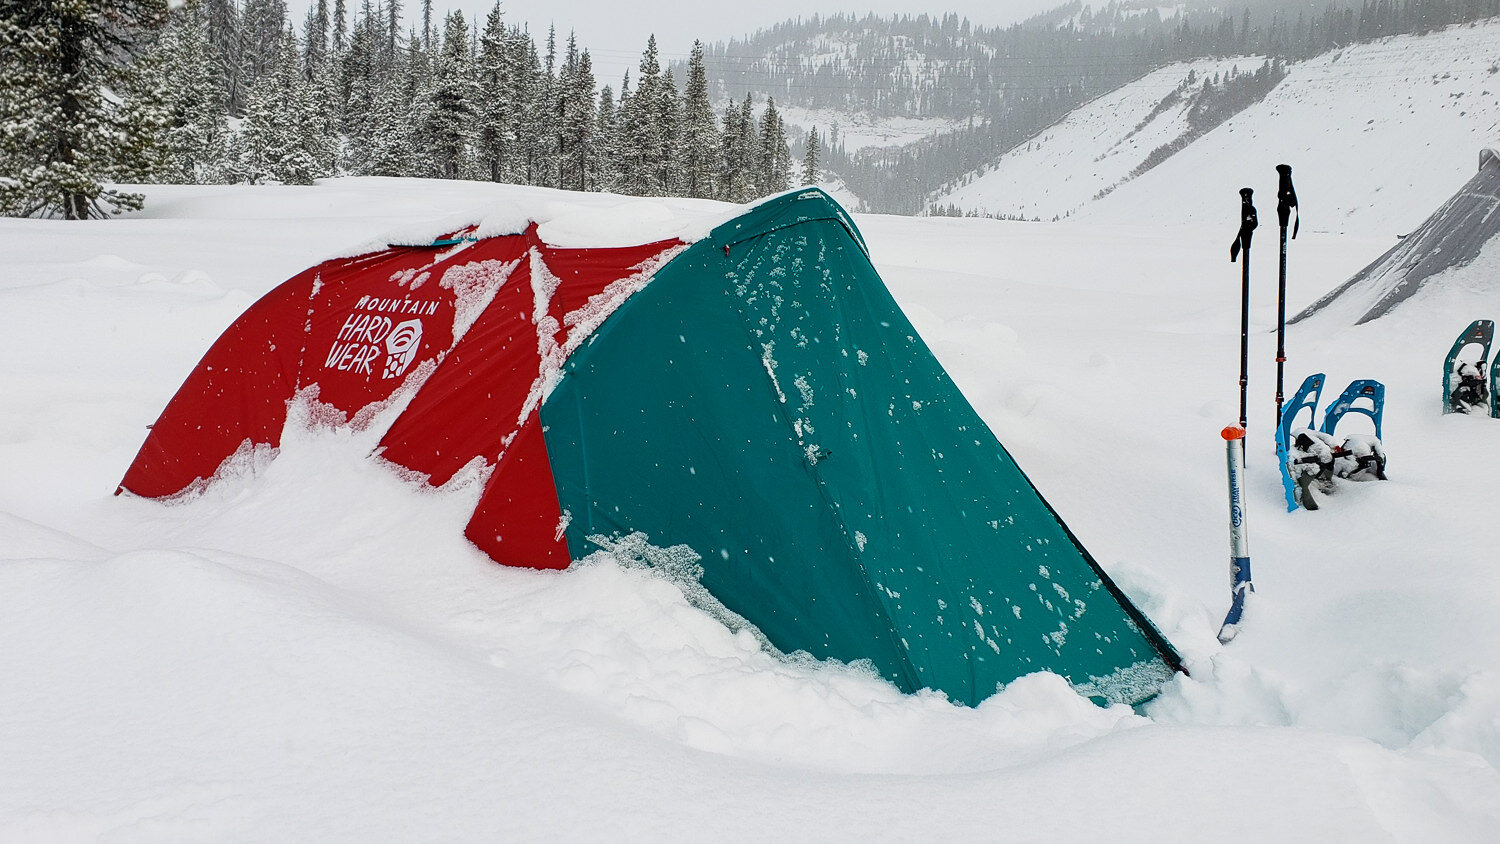 The Mountain Hardwear Outpost 2 is one of the best 4-season tents on the market for weight, strength & livability.